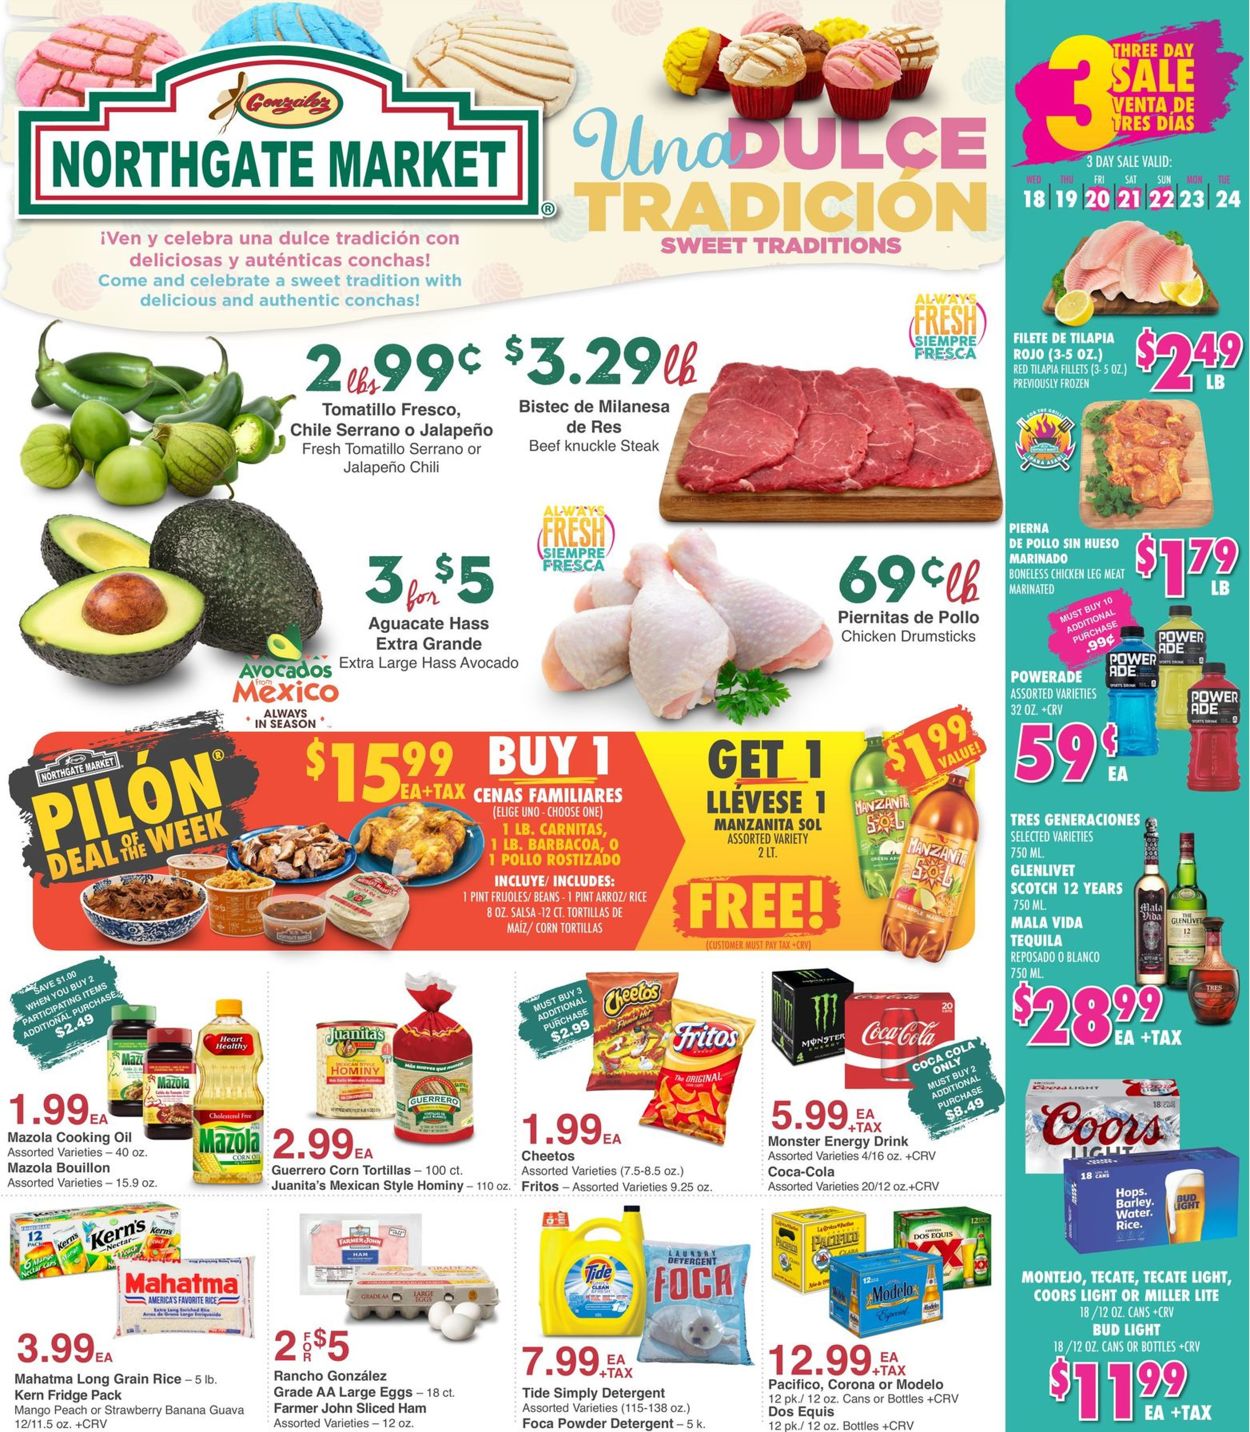 Northgate Market Weekly Ads Valid Until Frequent.